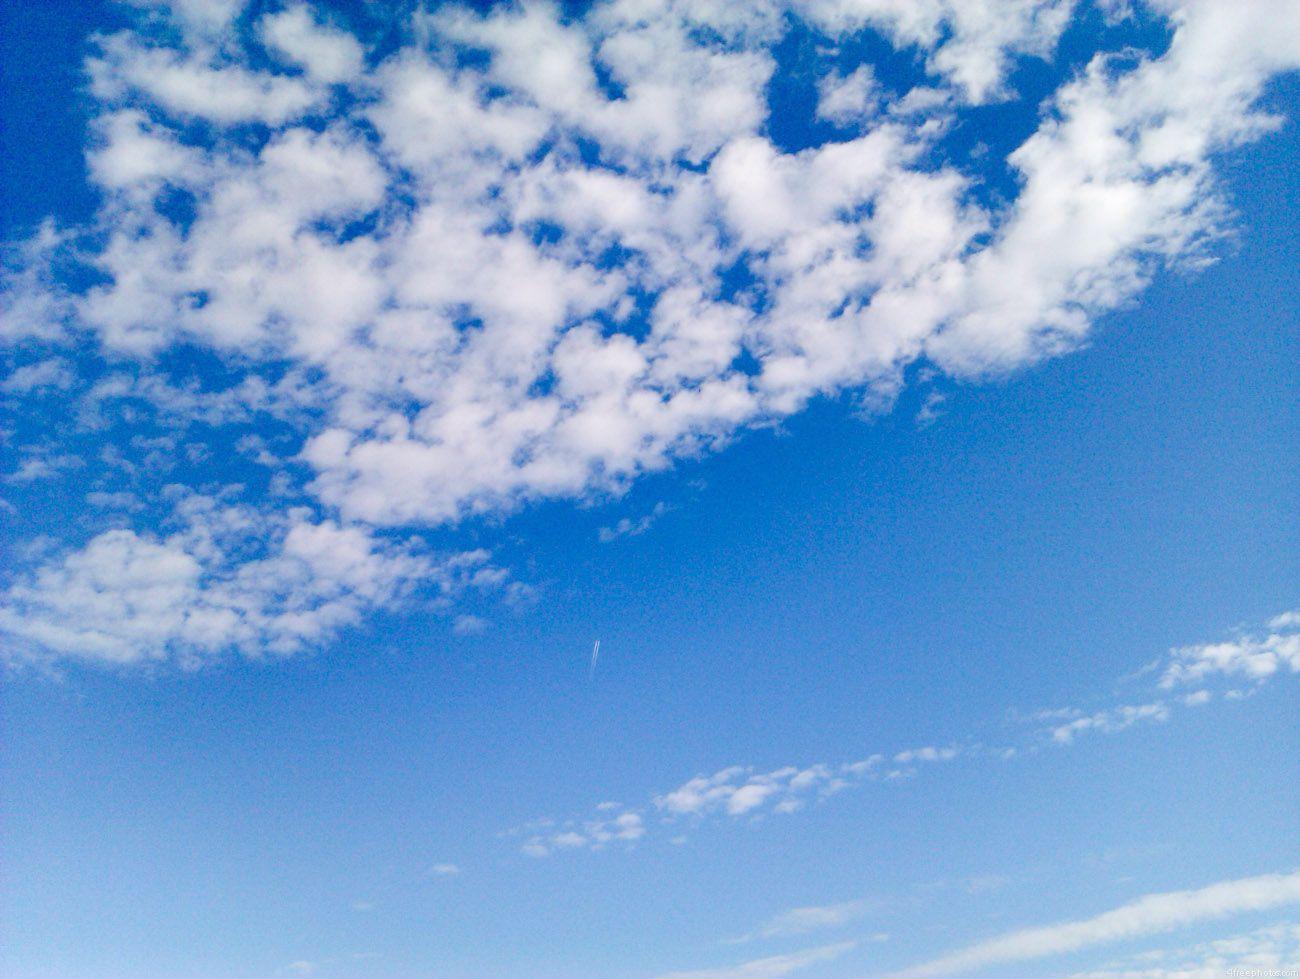 Sky background with clouds Free Photo